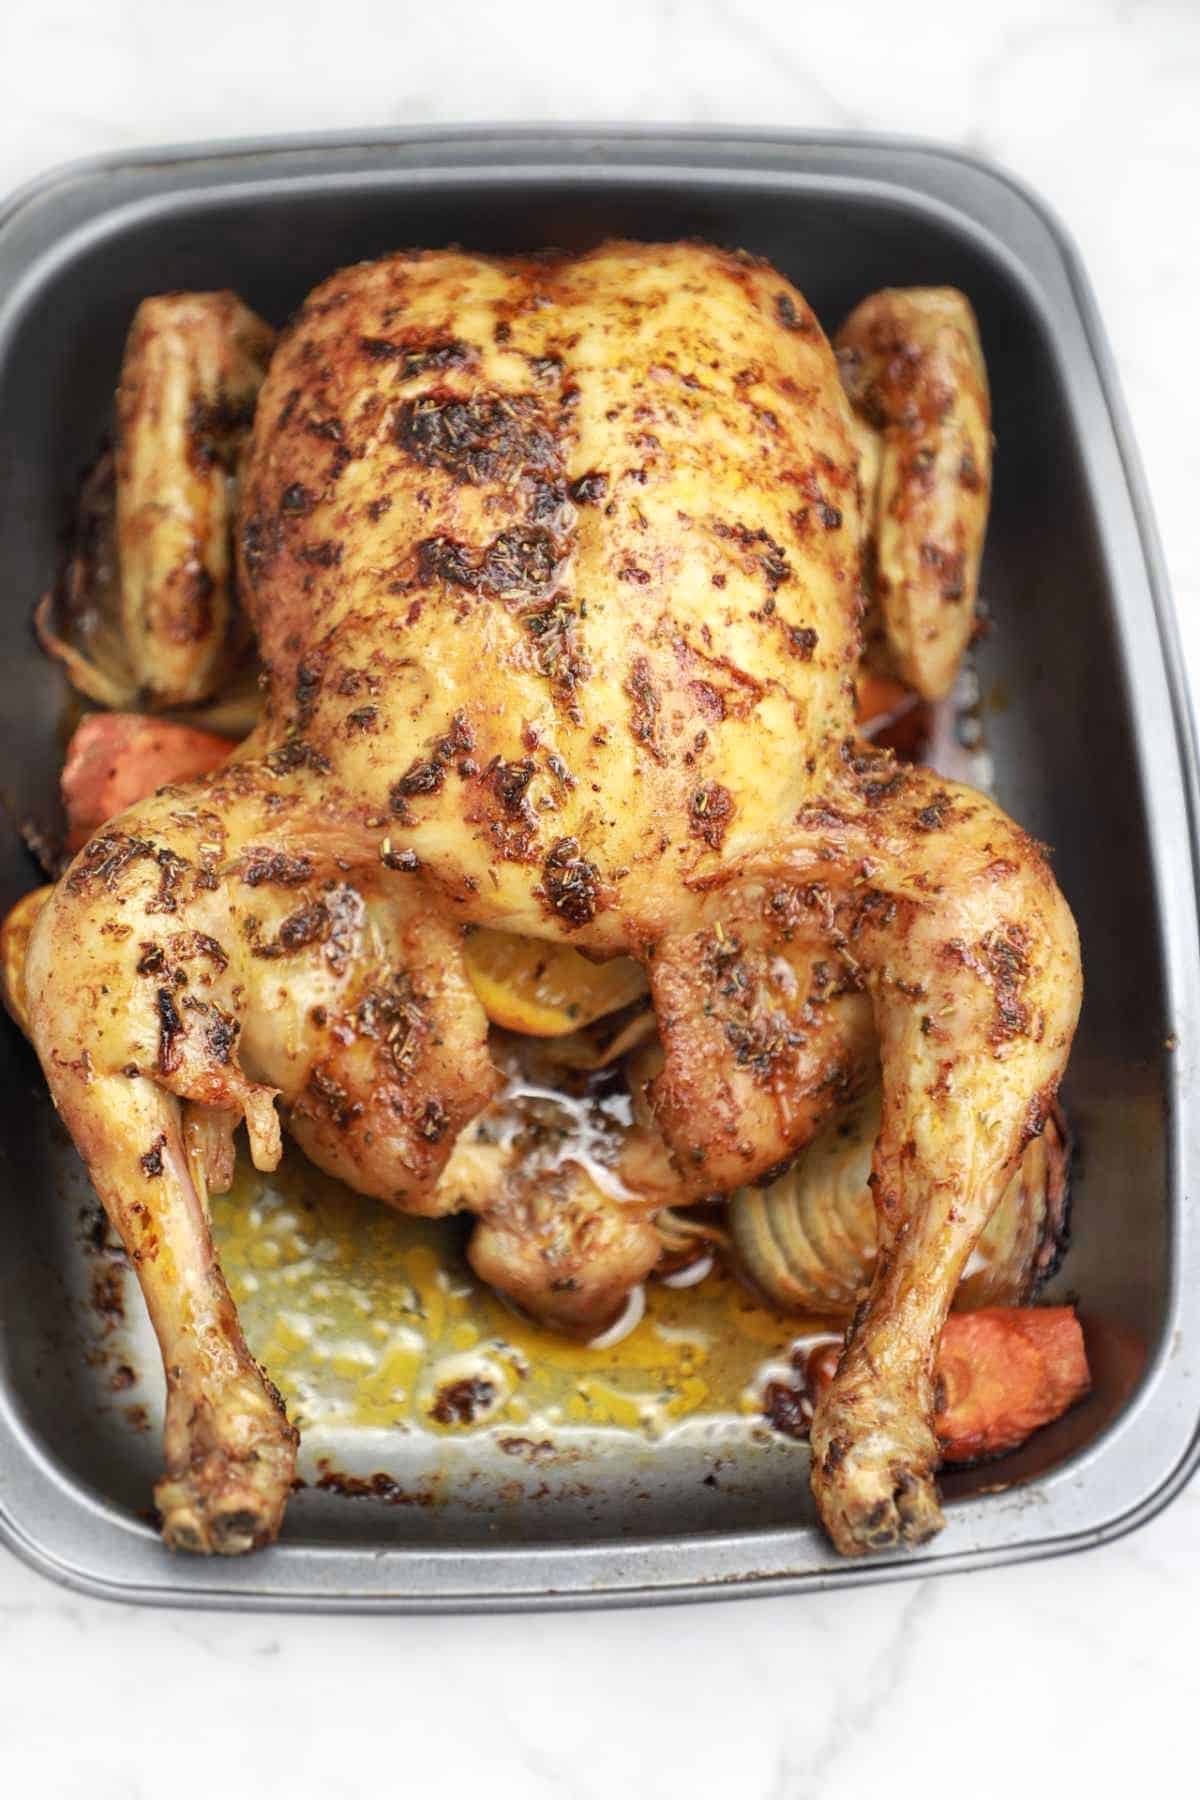 Whole roast chicken displayed in a grey baking dish.